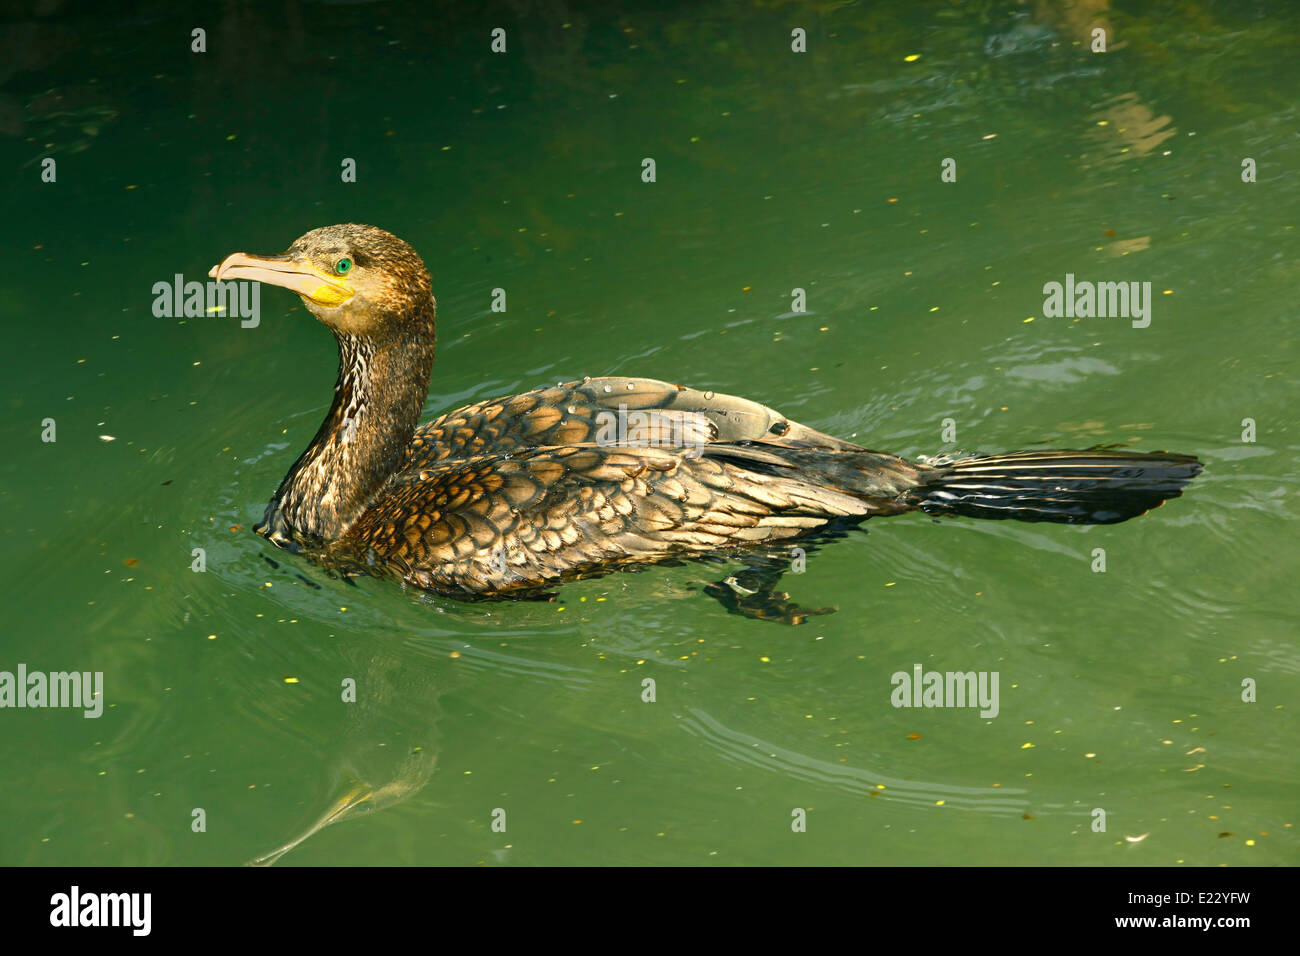 European Great Cormorant (Phalacrocorax carbo carbo) with water droplets Stock Photo